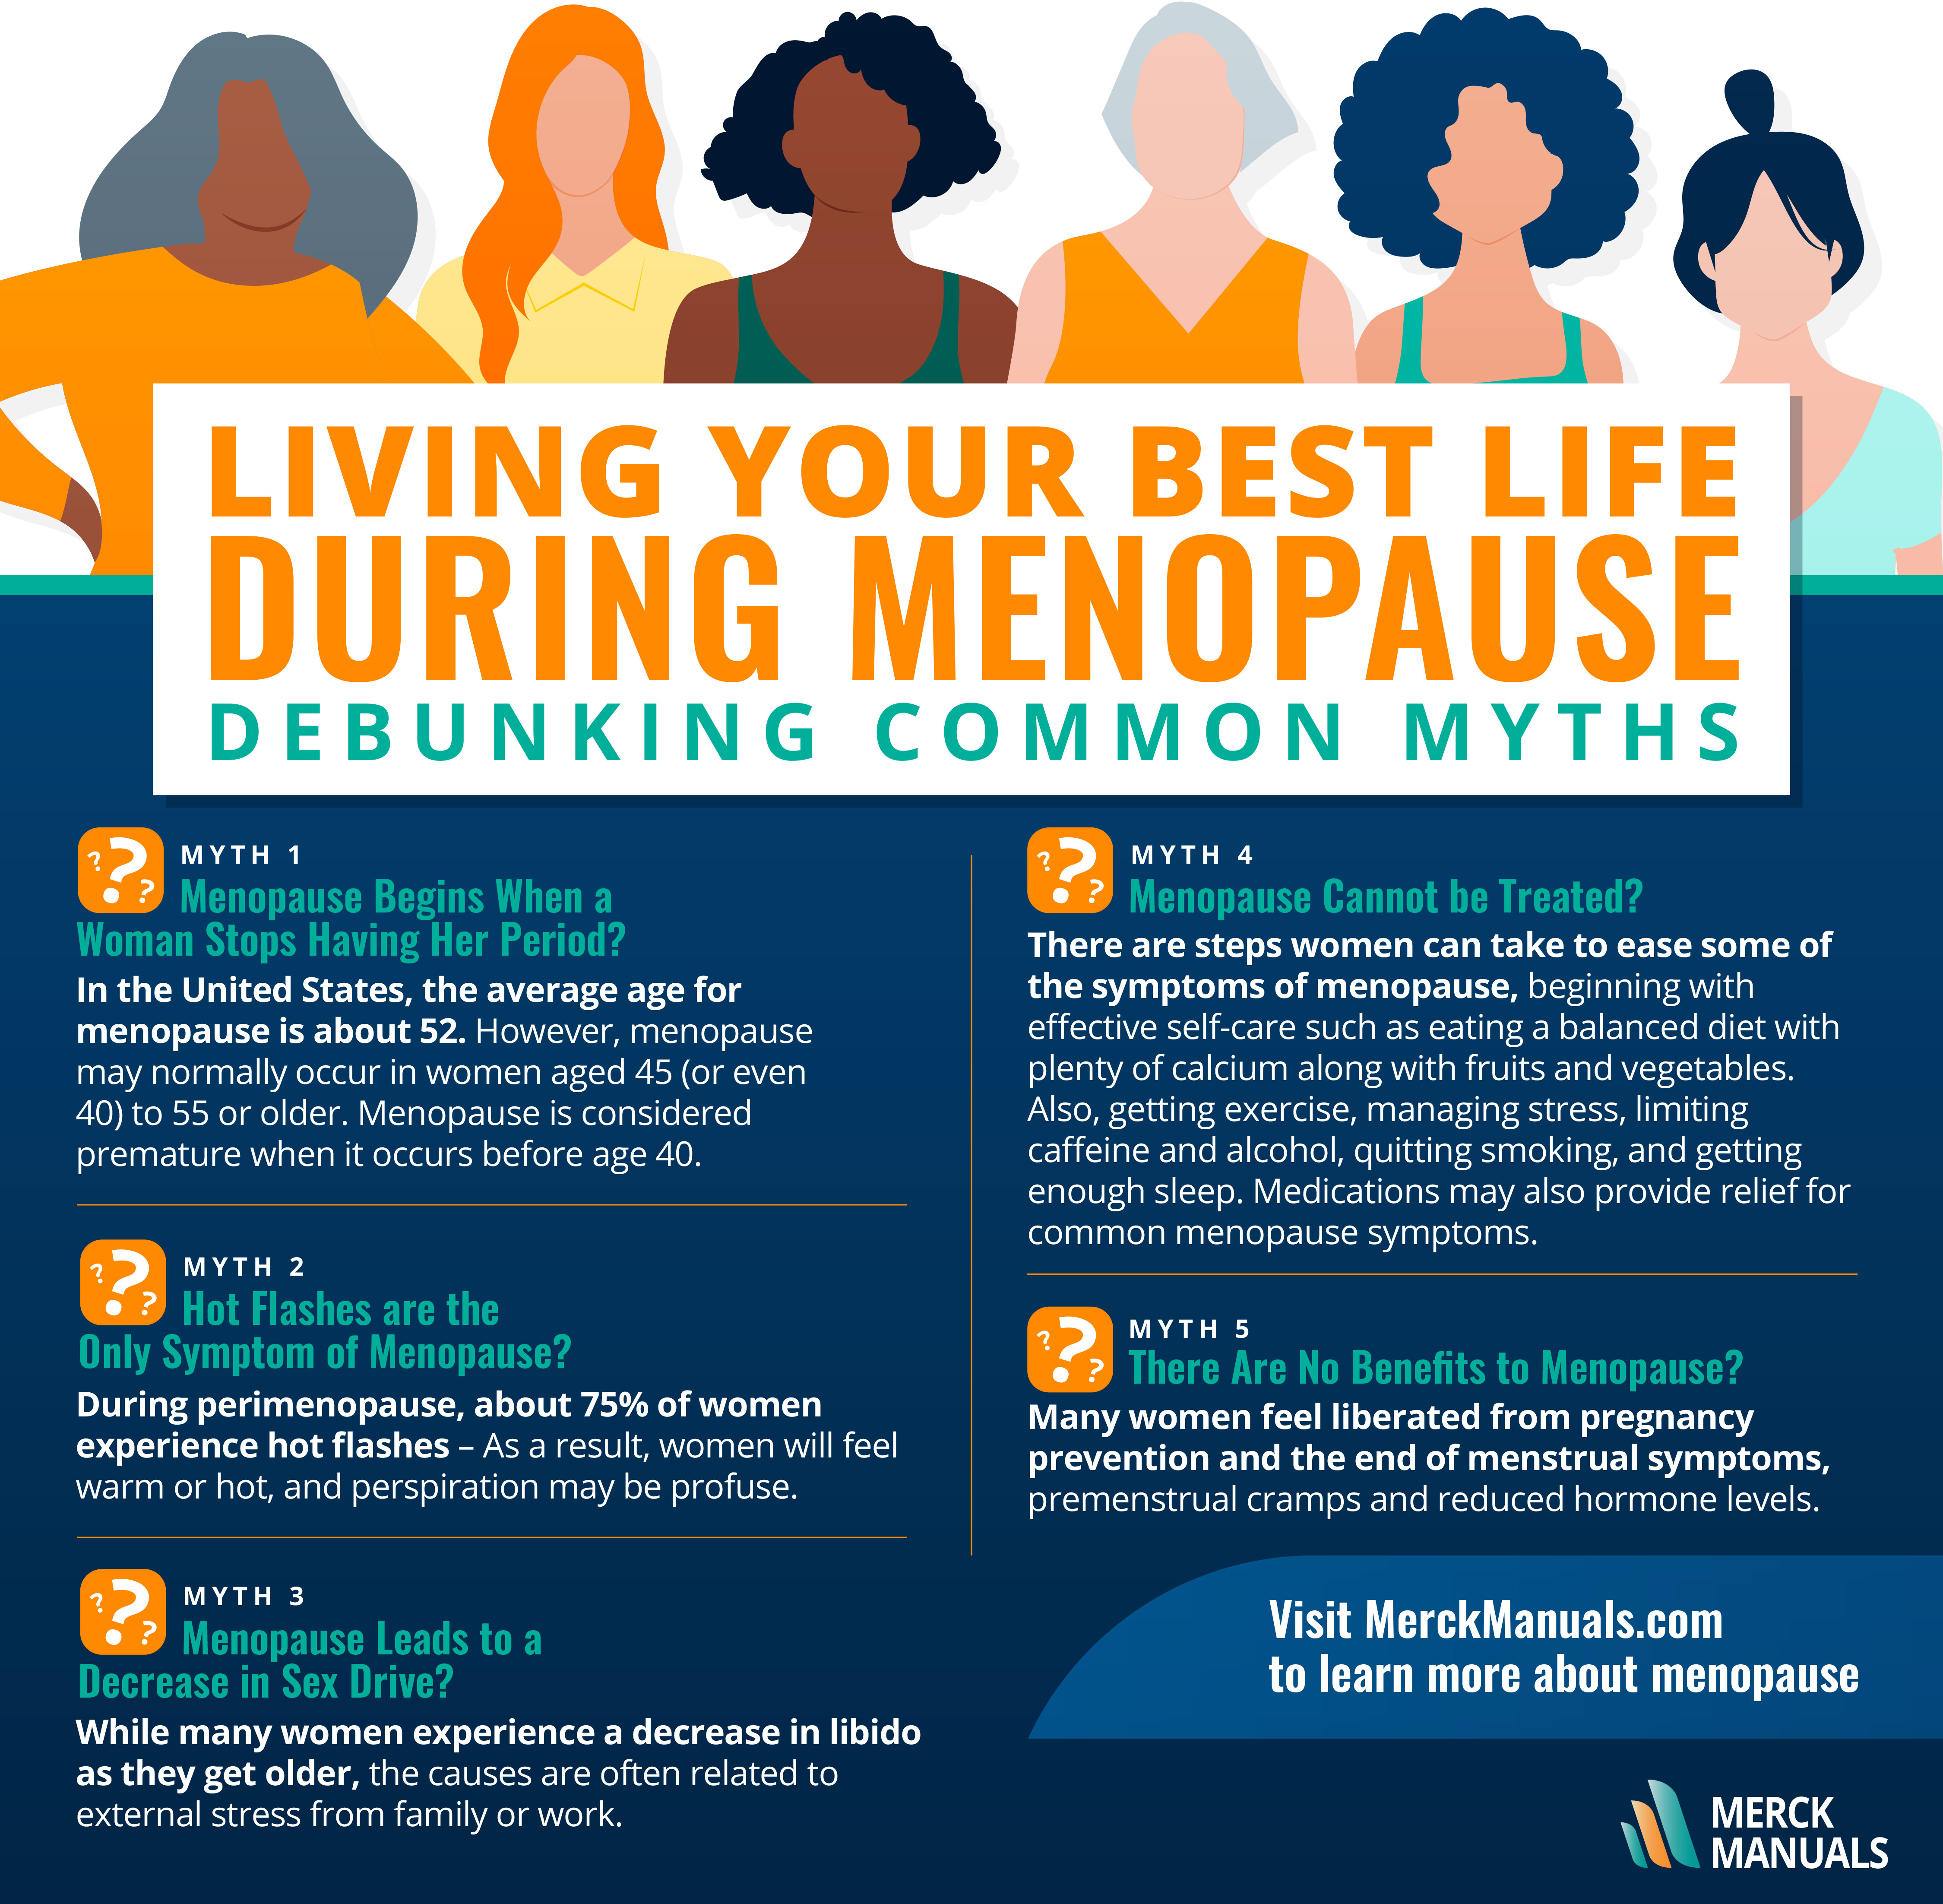 11 Things Women Should Know About Menopause